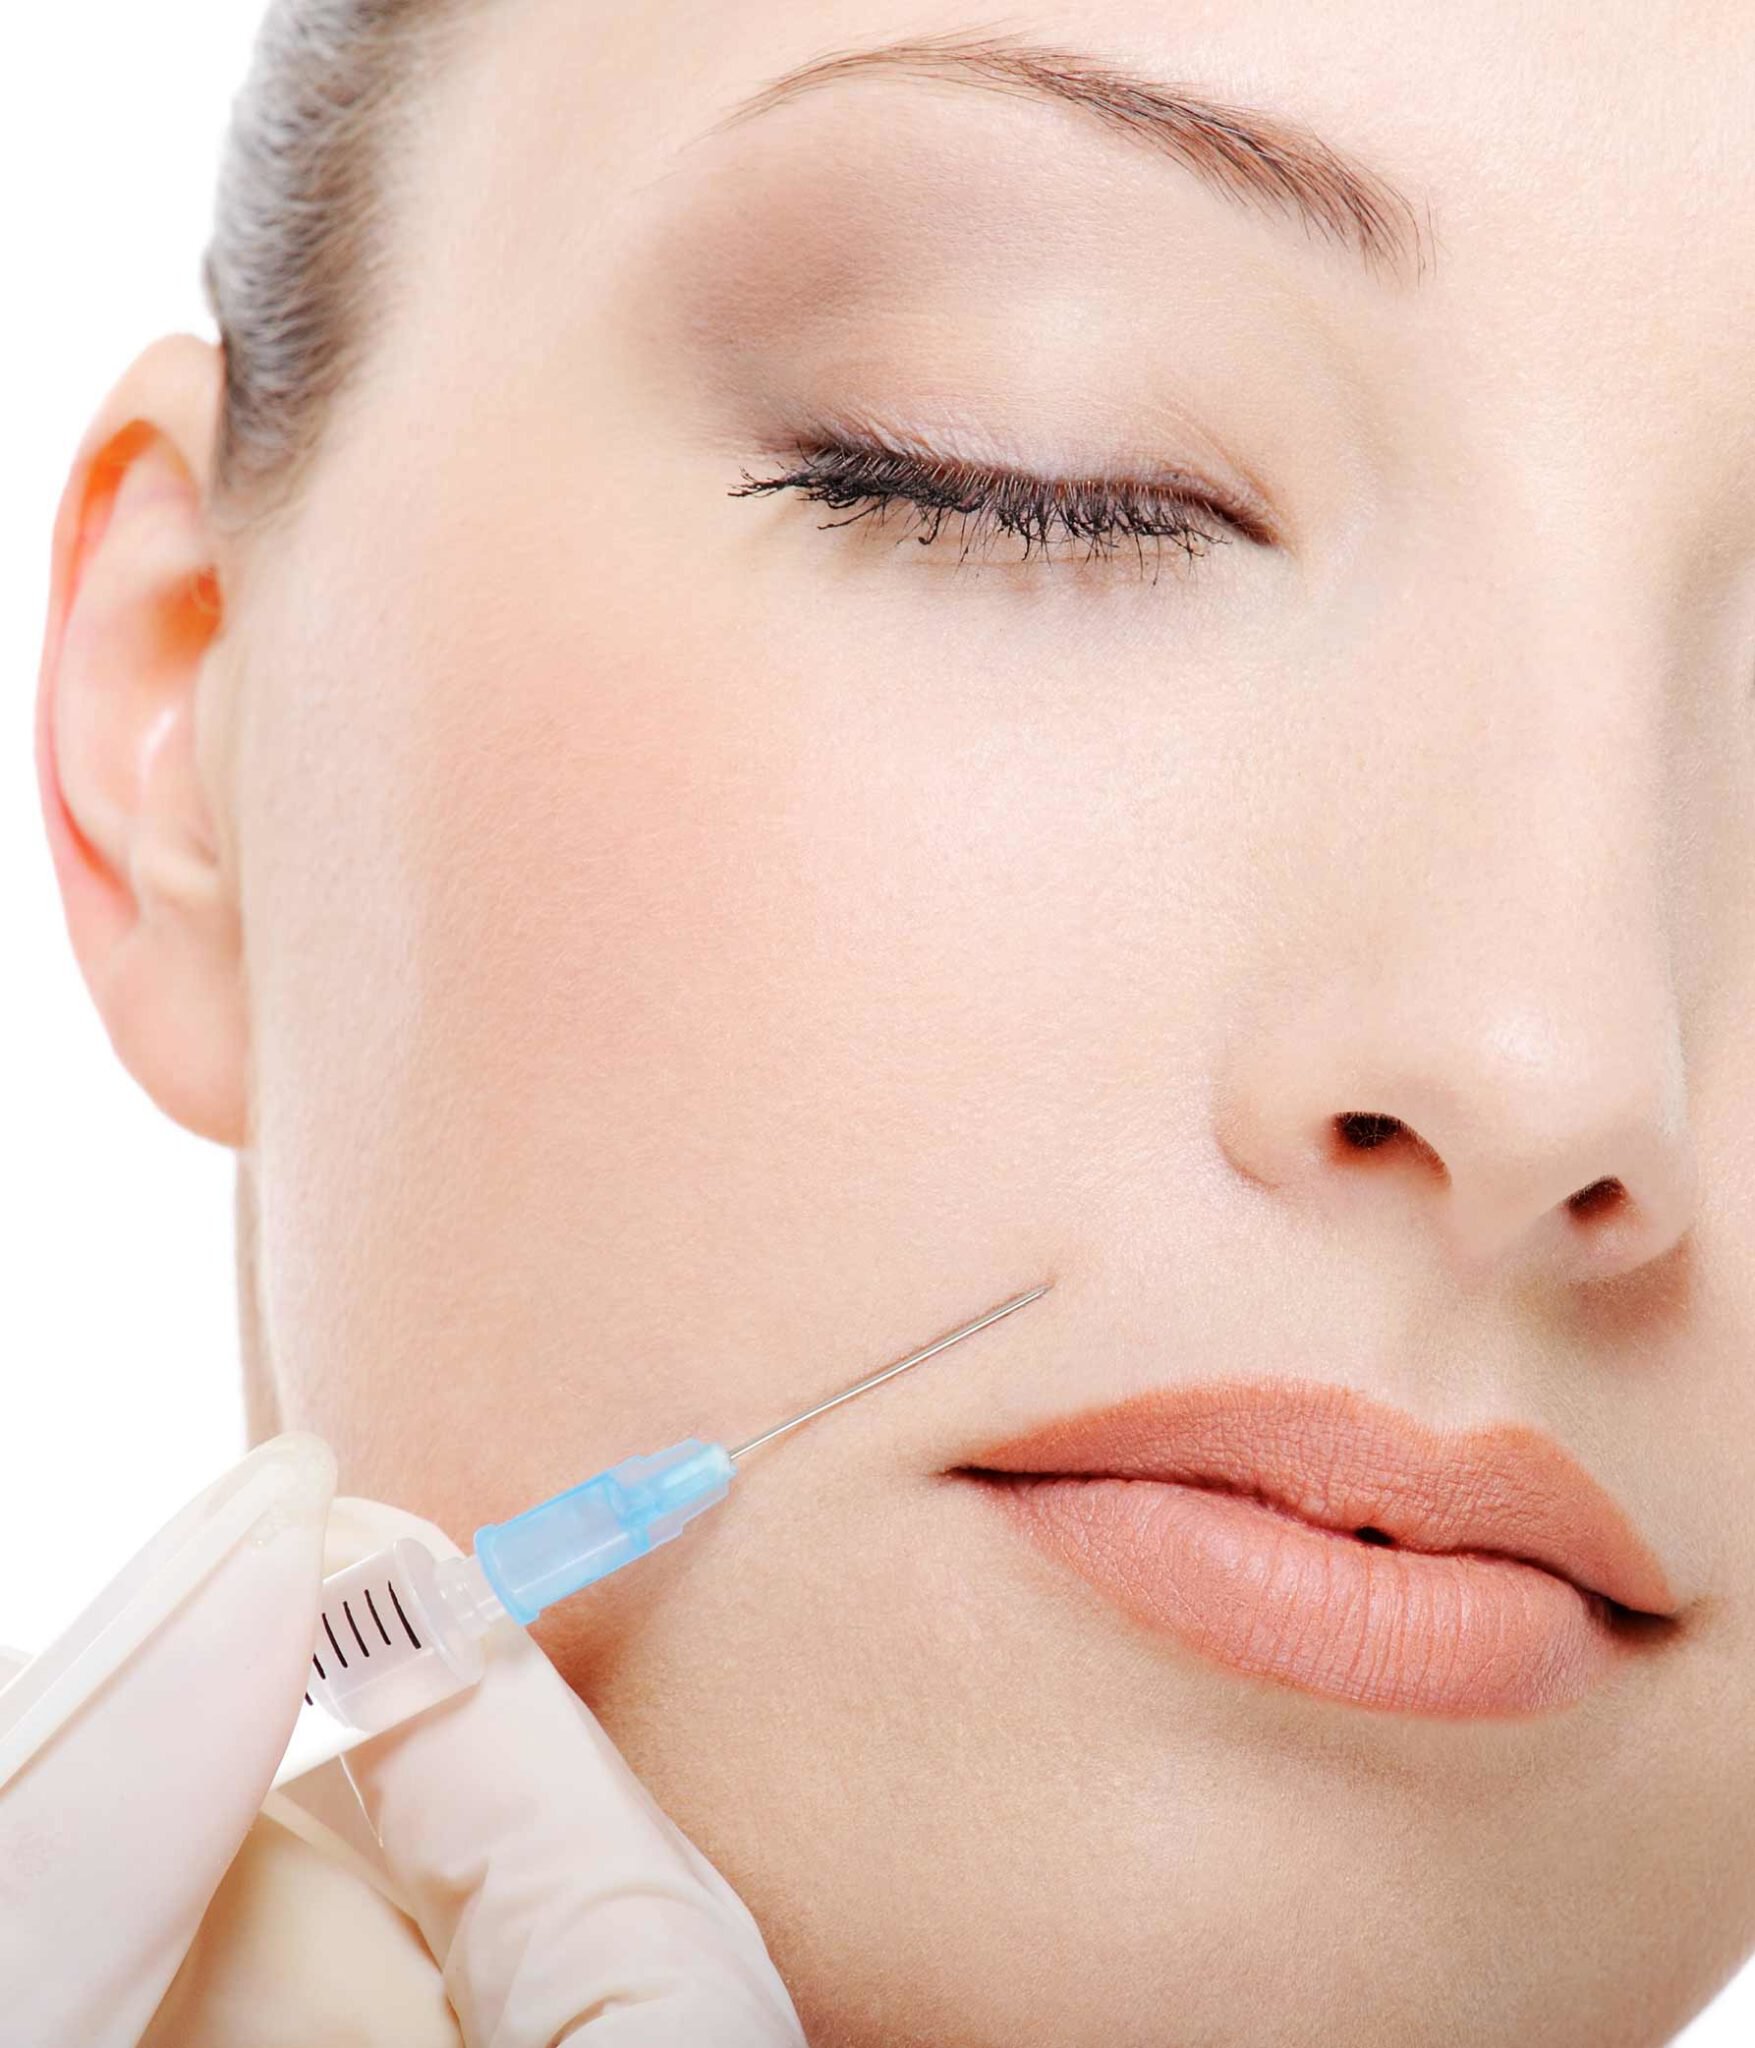 Austin Non-Surgical Cosmetic Treatments model being injected